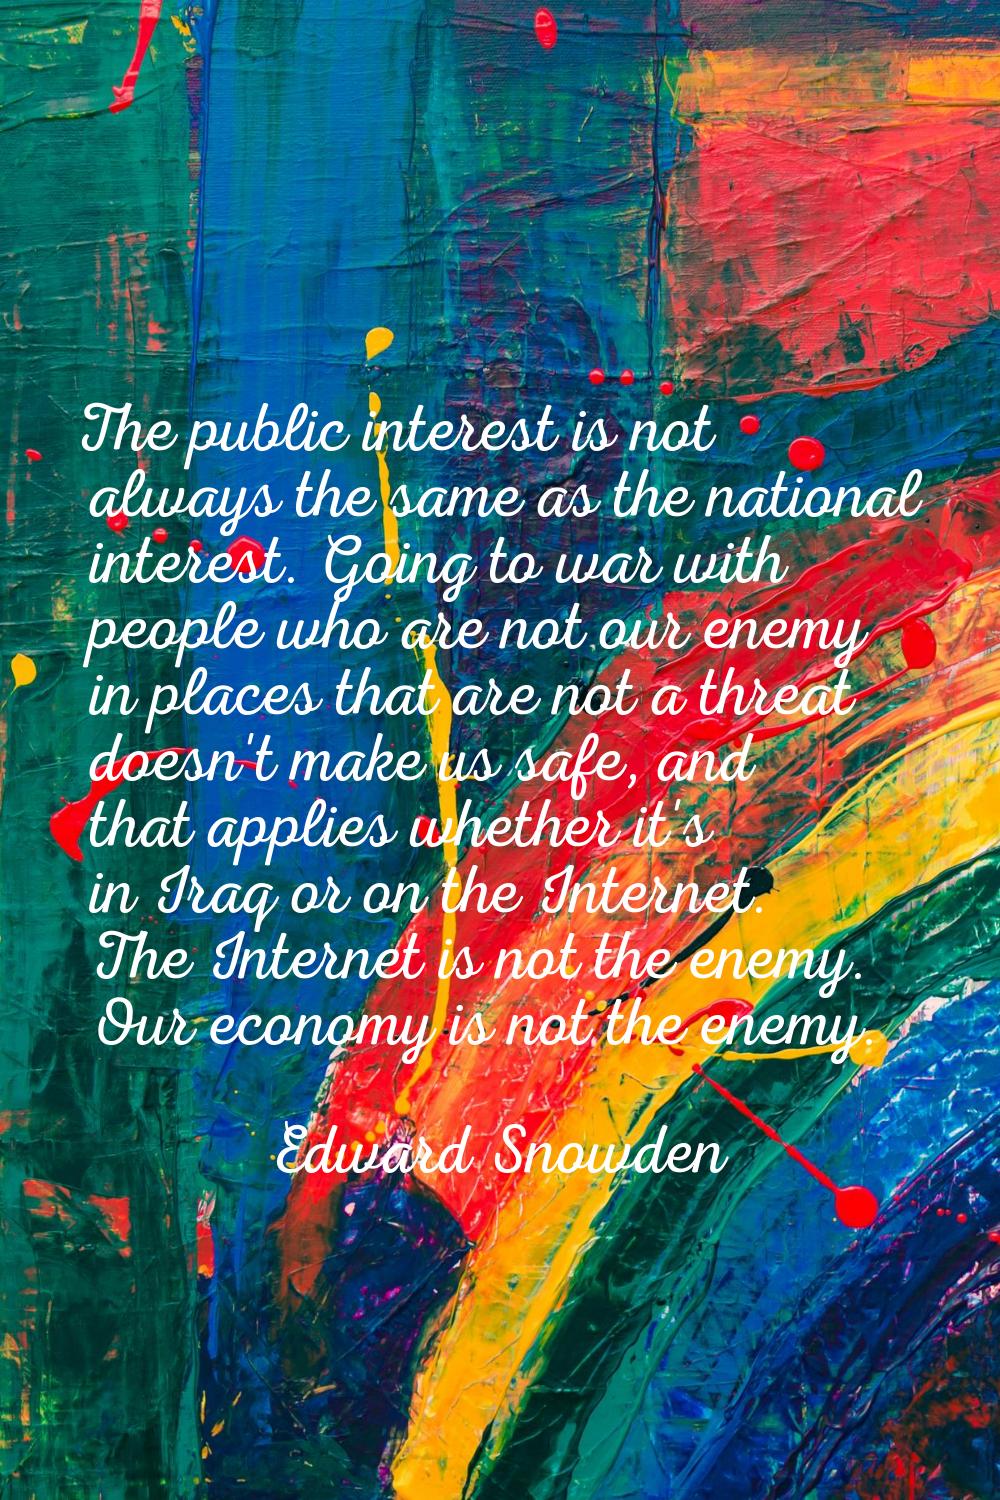 The public interest is not always the same as the national interest. Going to war with people who a